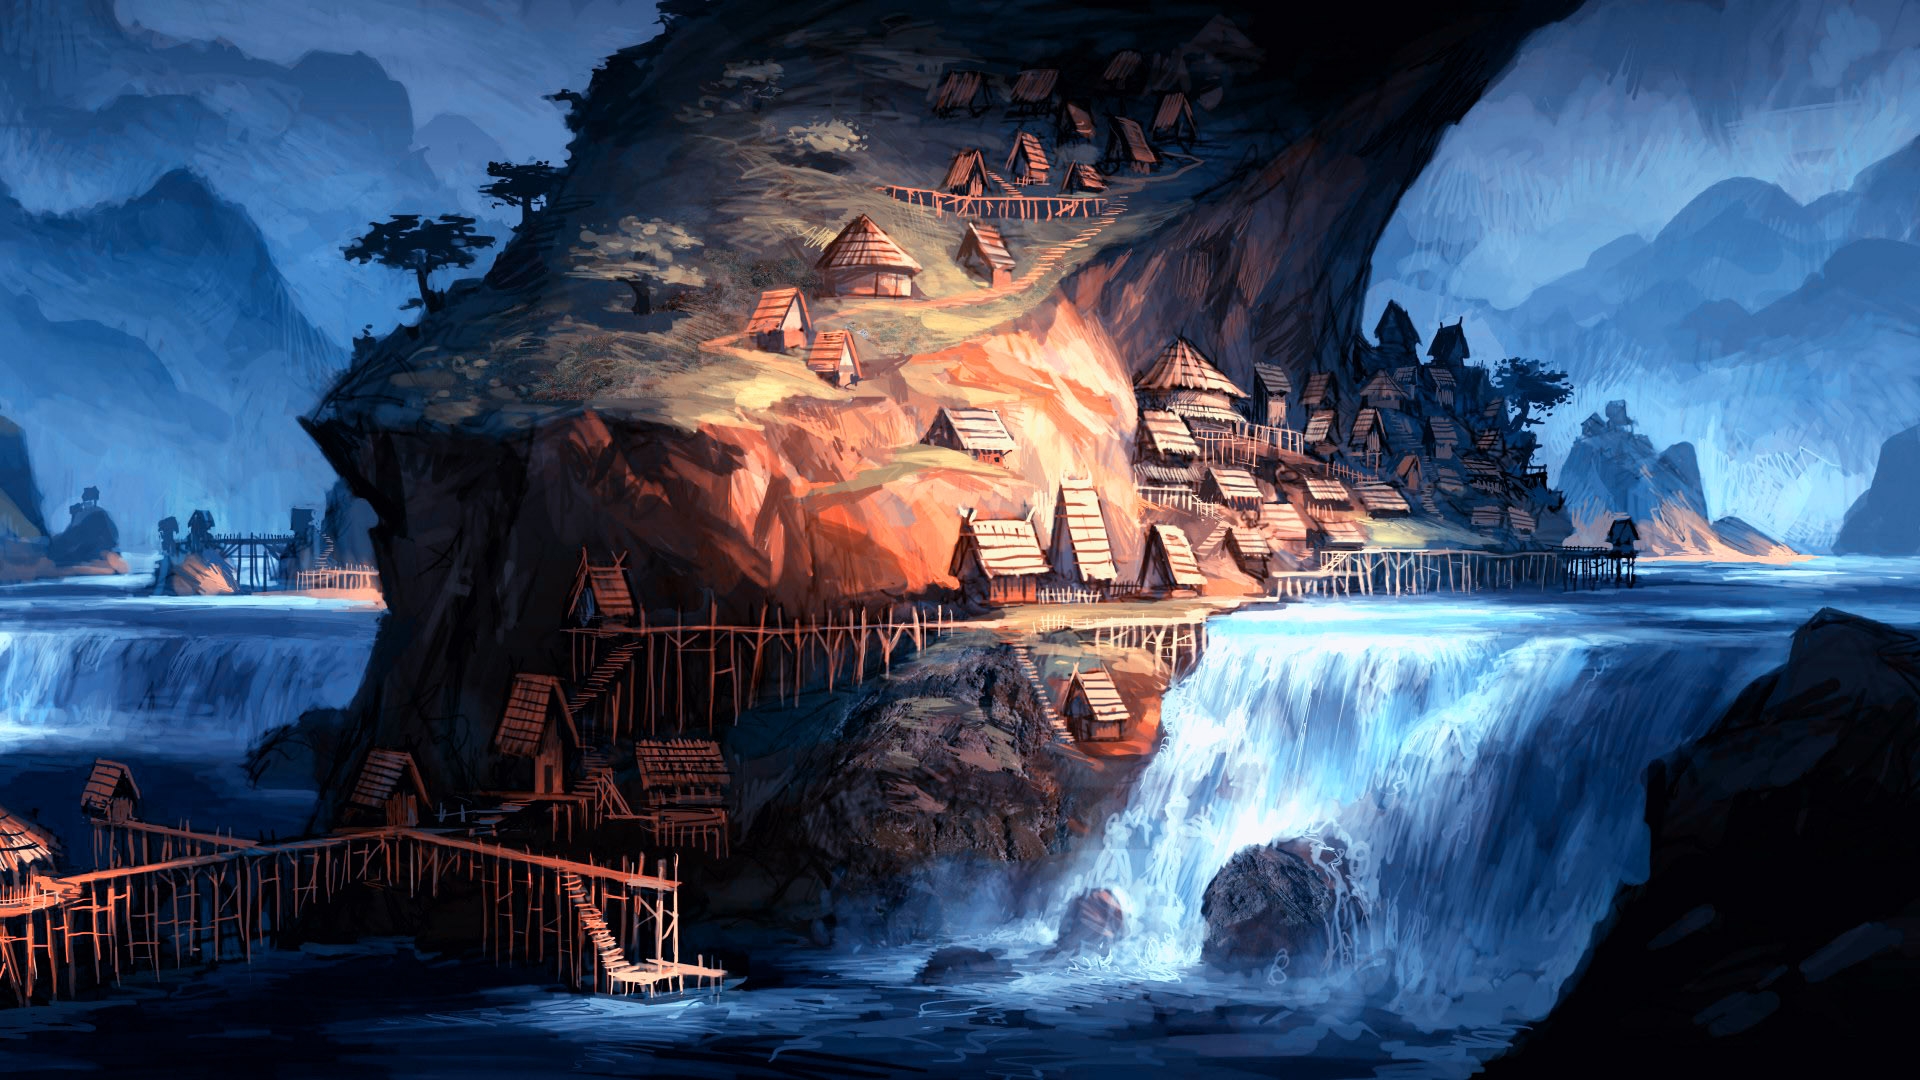 fantasy, Art, Landscapes, Waterfalls, Rivers, Islands, Town, Village, Houses, Architecture ...